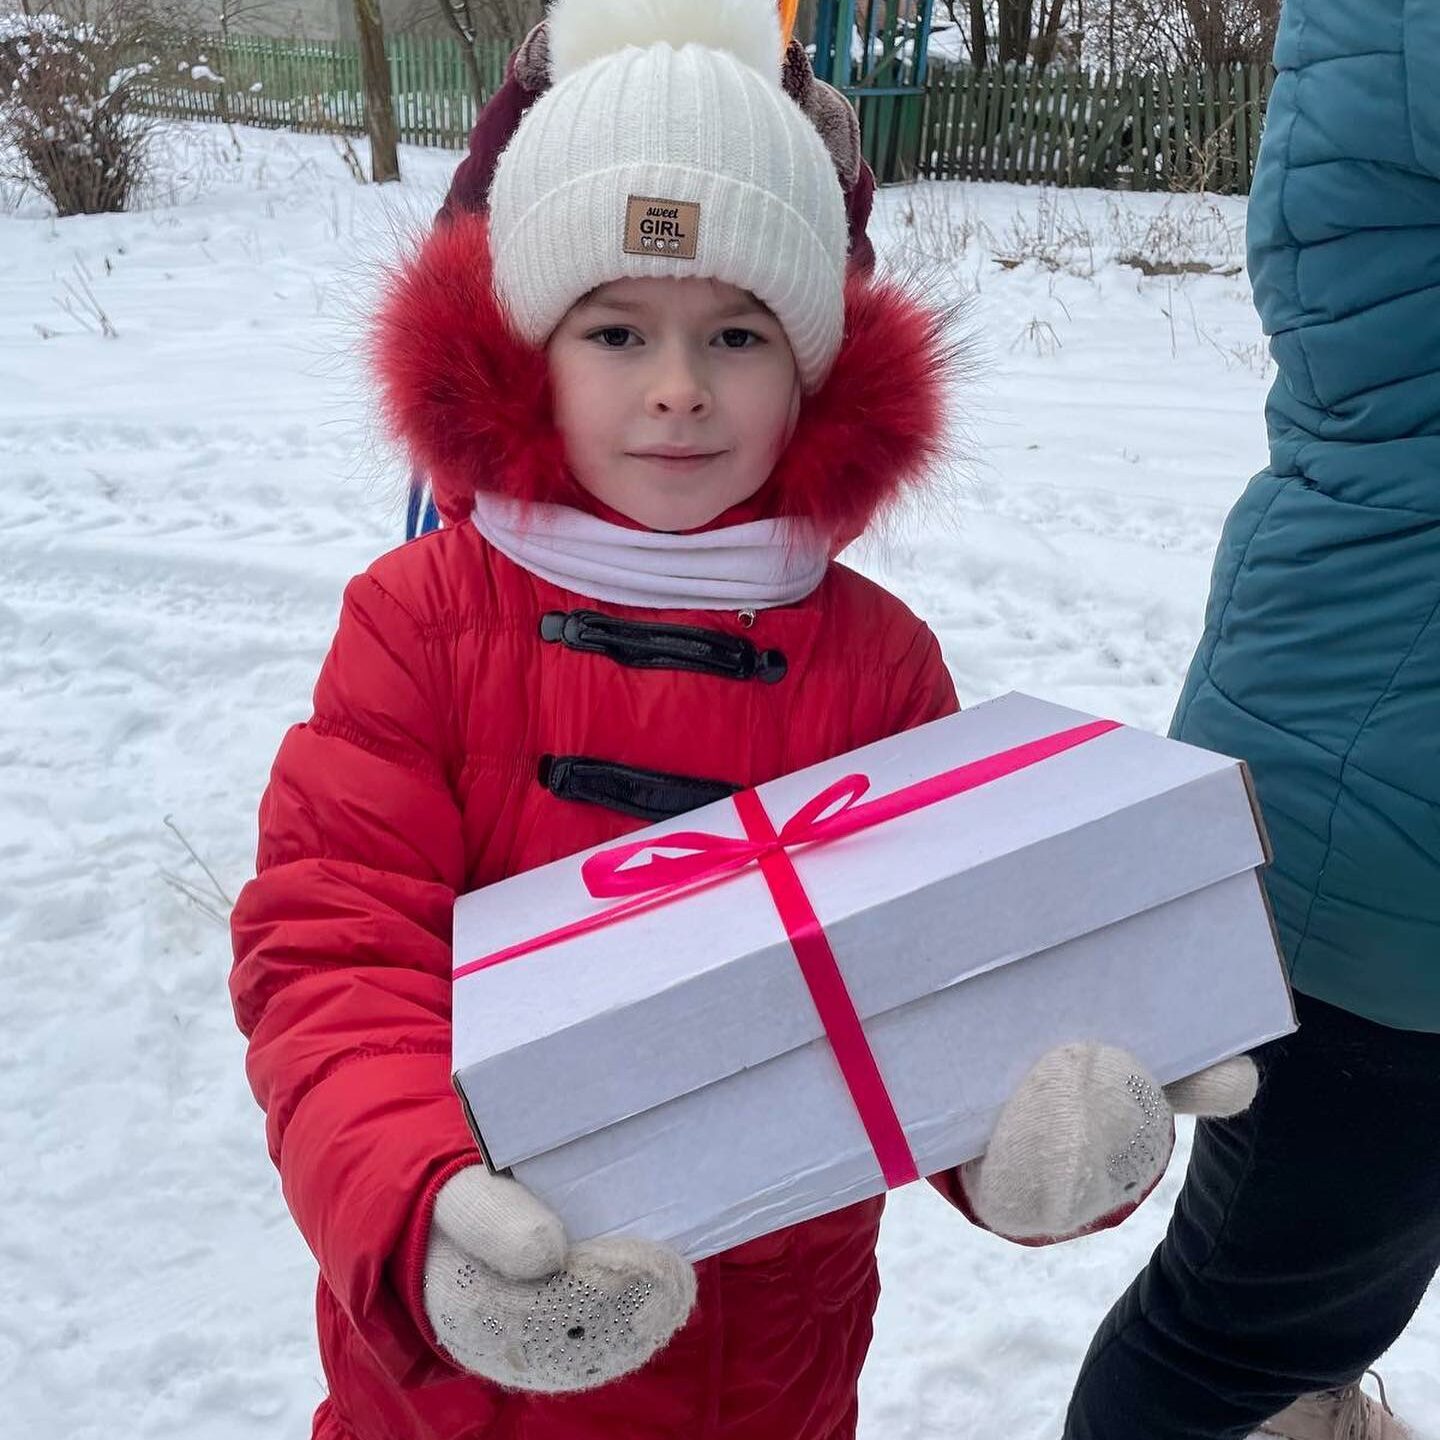 a small child in a red coat holding a white box.